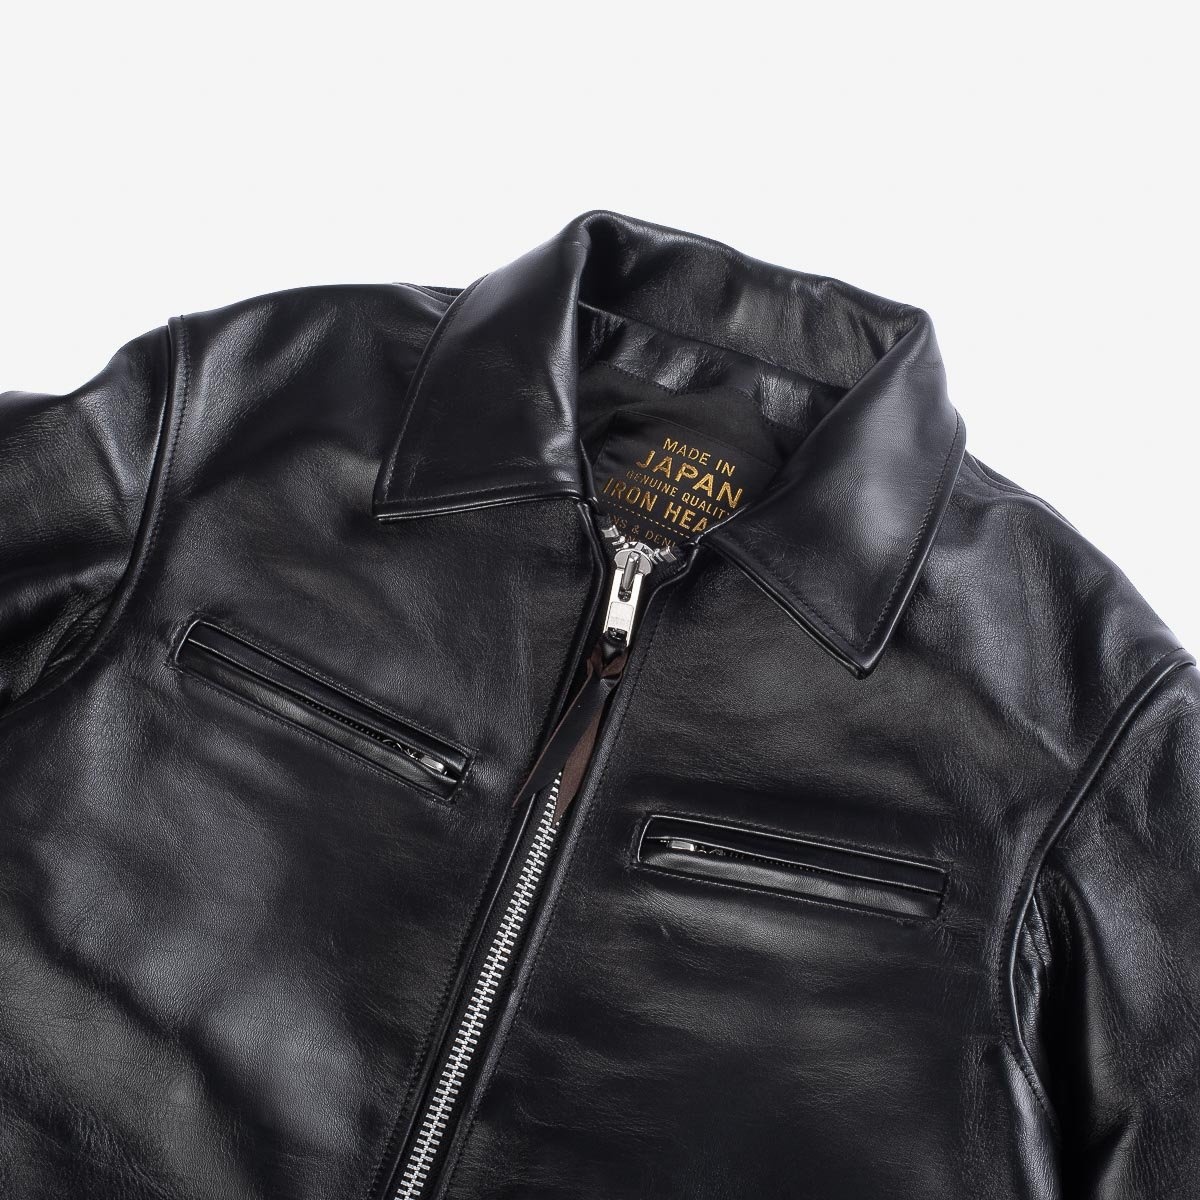 IHJ-54-BLK Japanese Horsehide Rider’s Jacket with Collar - Black (Tea-Core Dyed) - 7